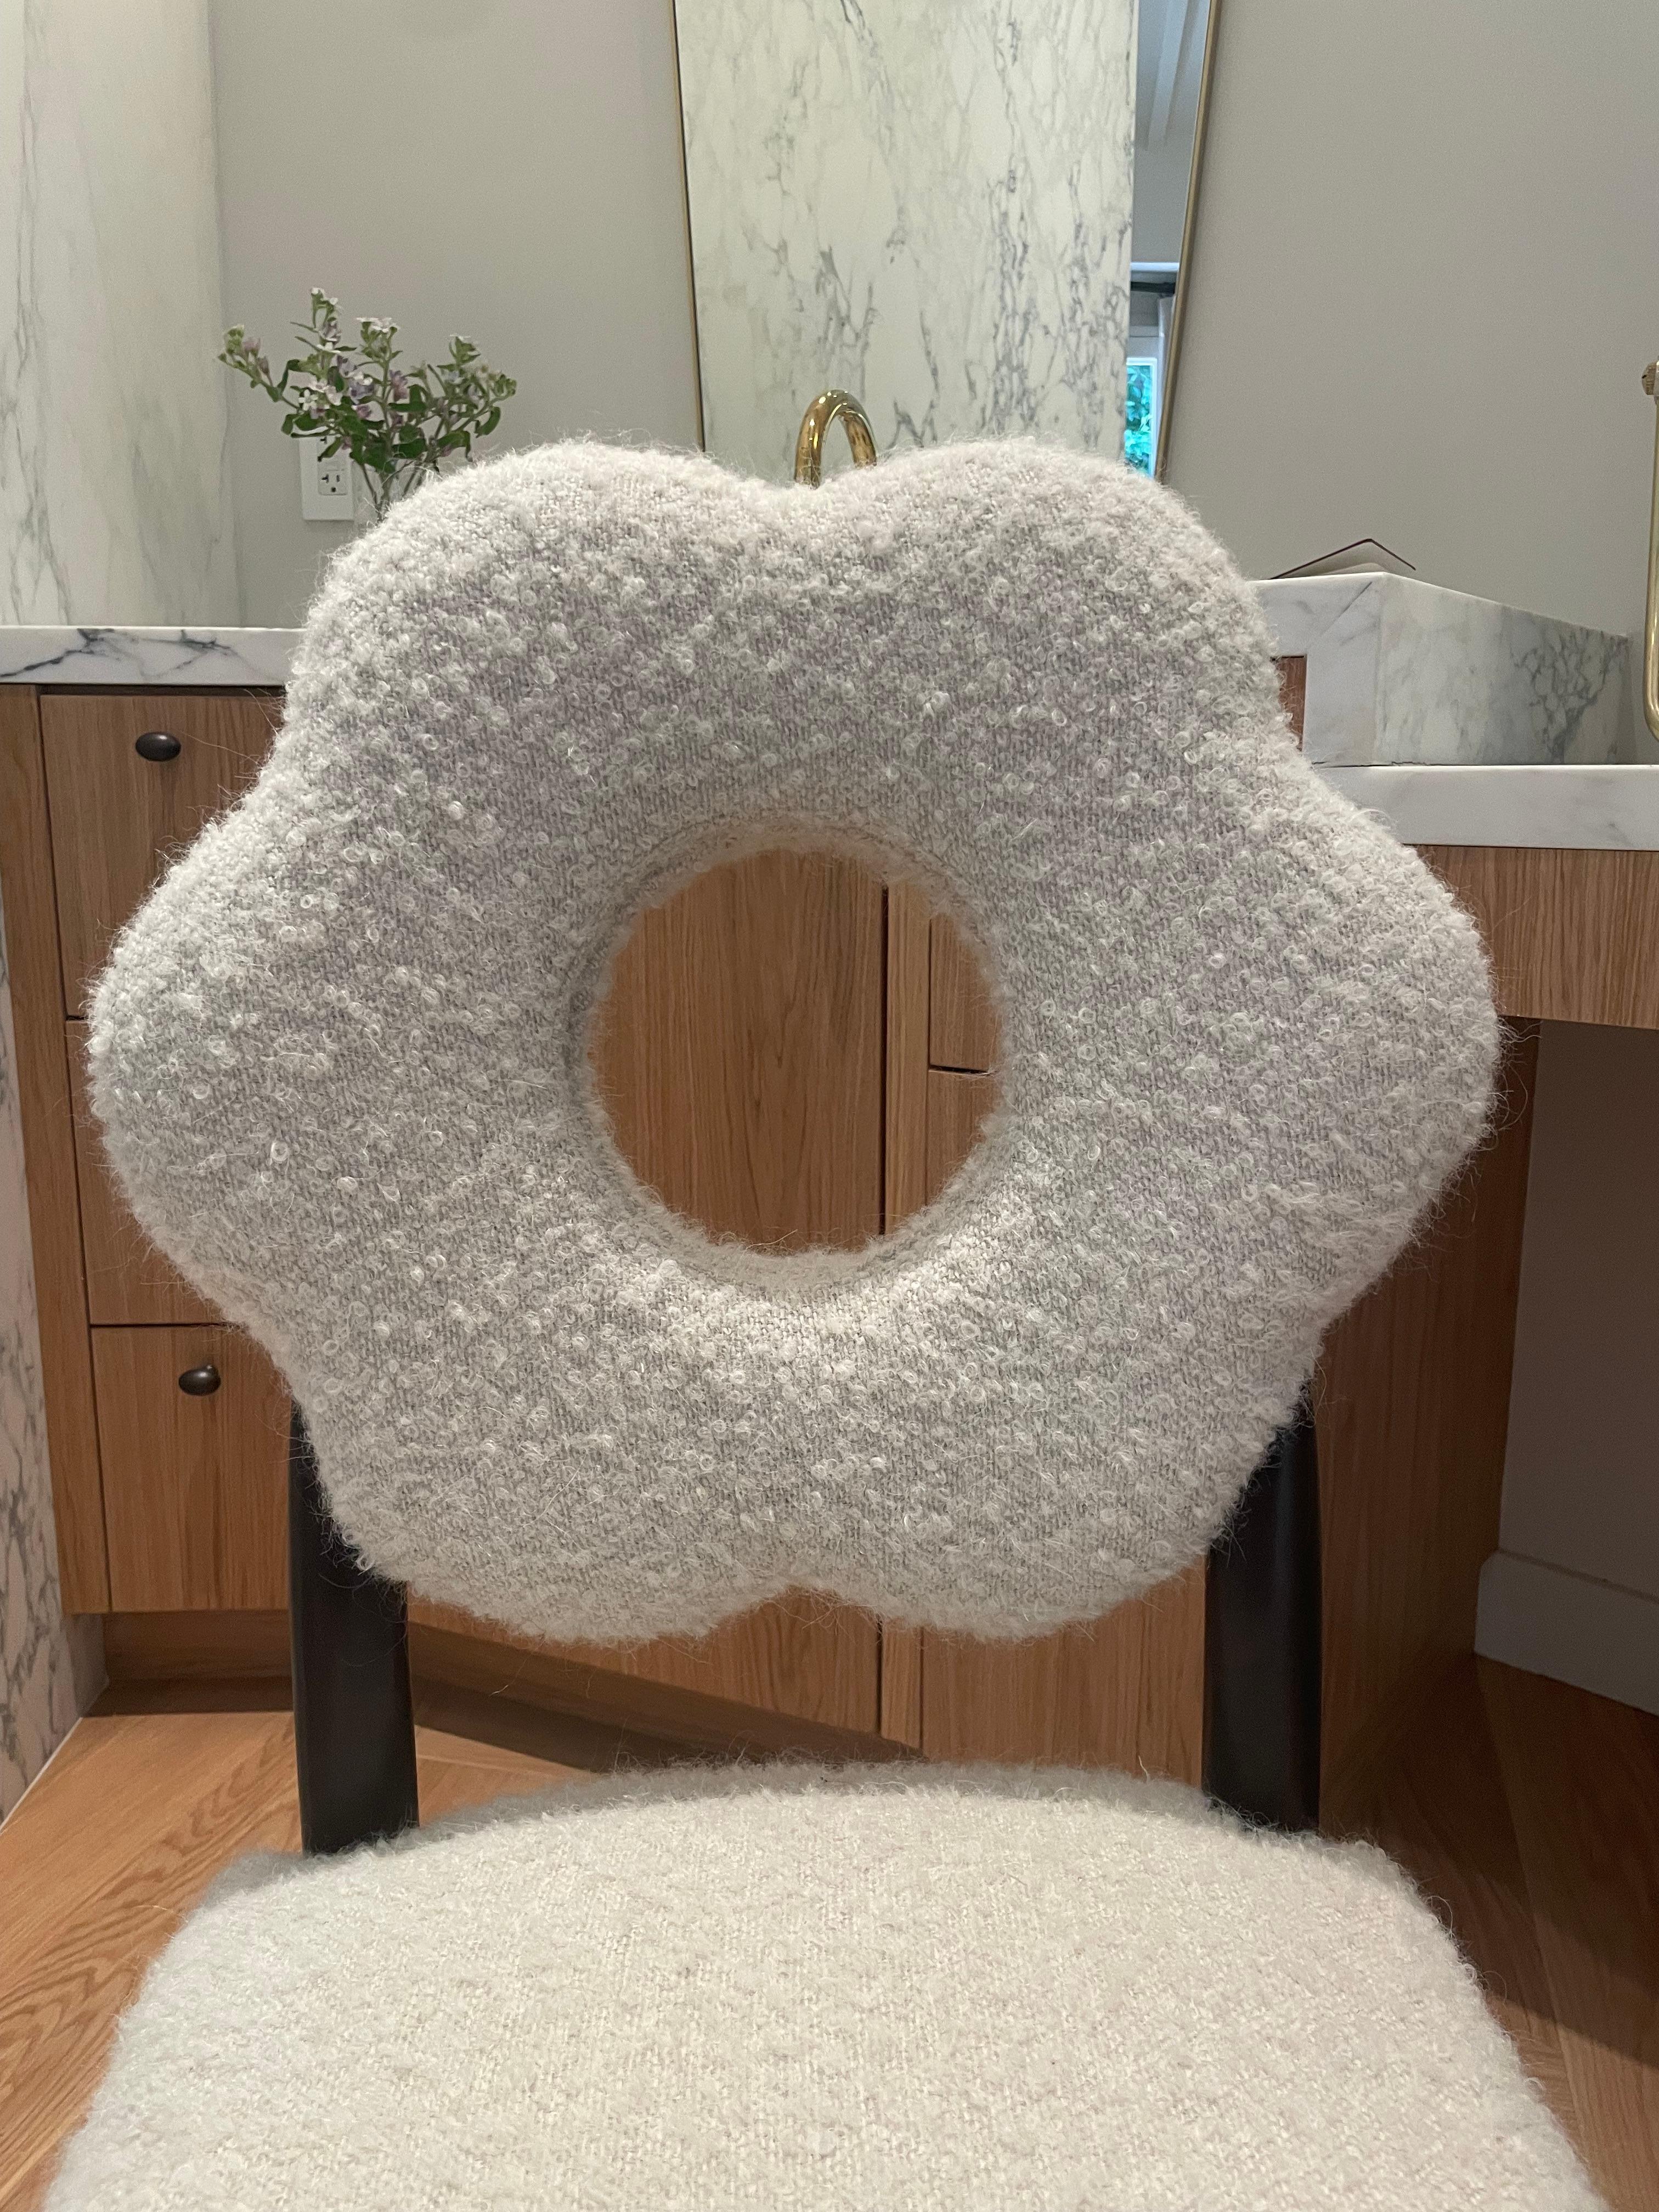 American Studio OSKLO 'Flower' Chair in cozy White Boucle  For Sale